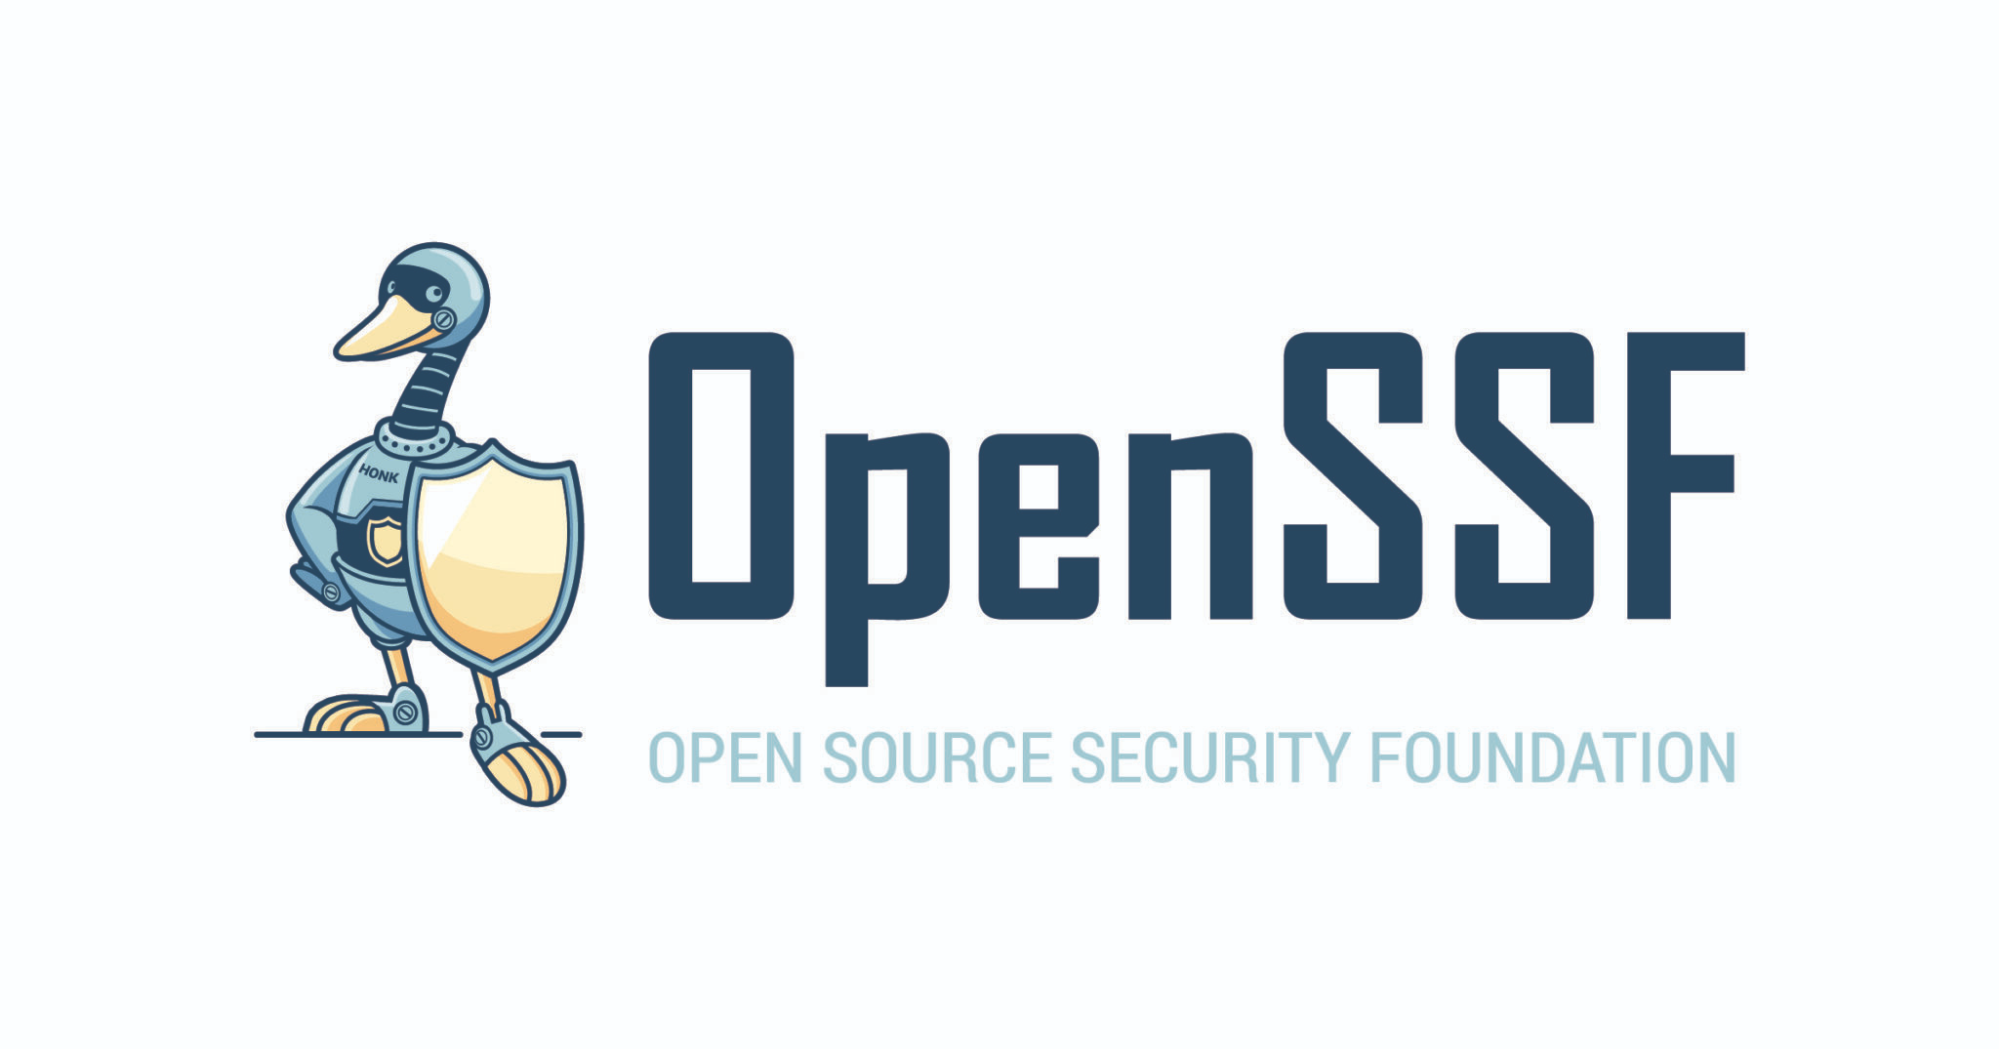 Security of software package repositories on the spotlight